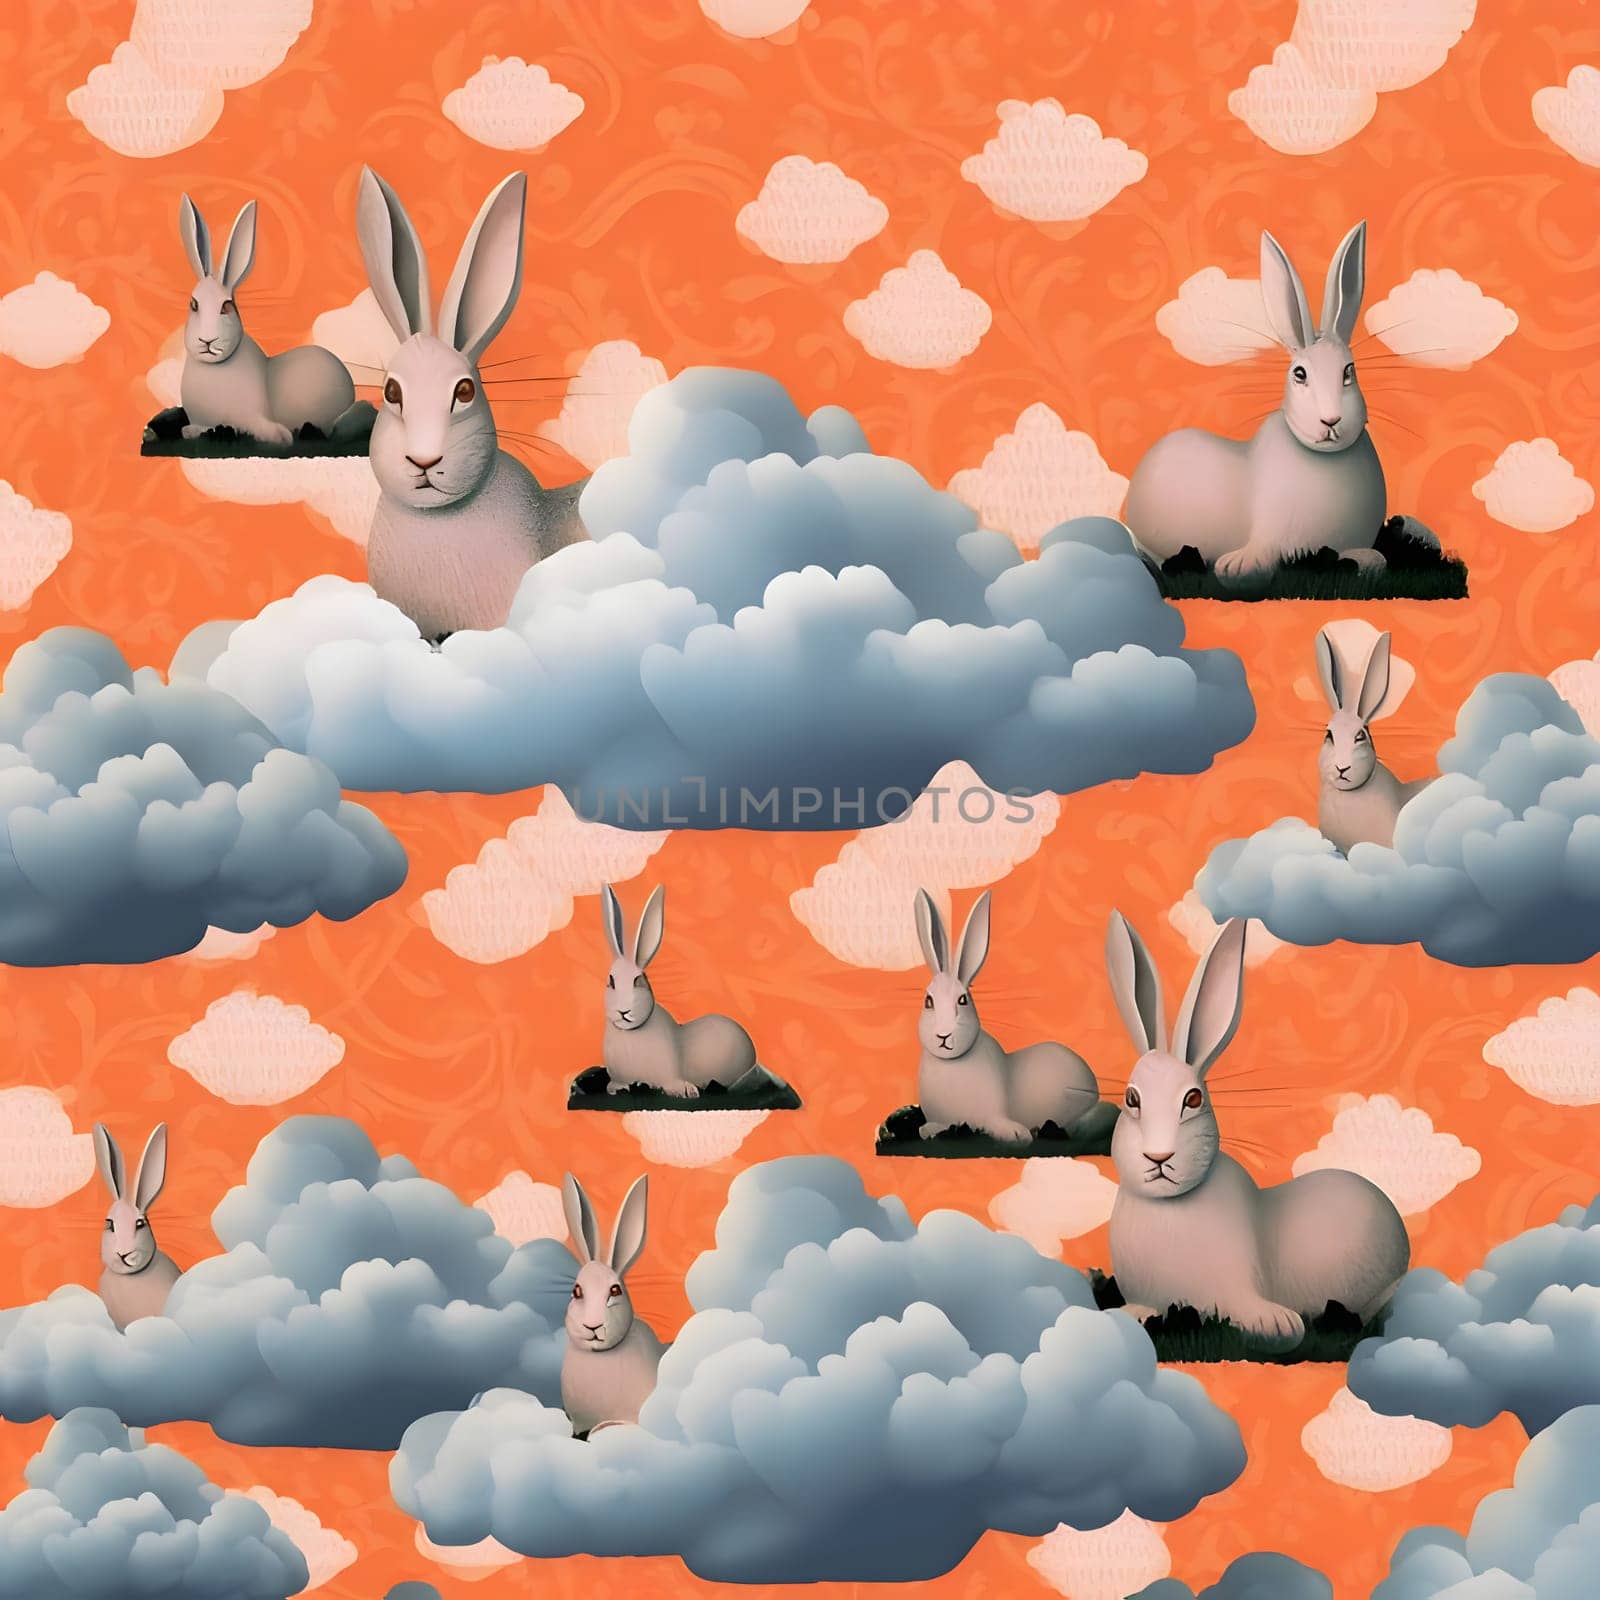 Patterns and banners backgrounds: Seamless pattern with bunnies and clouds on orange background